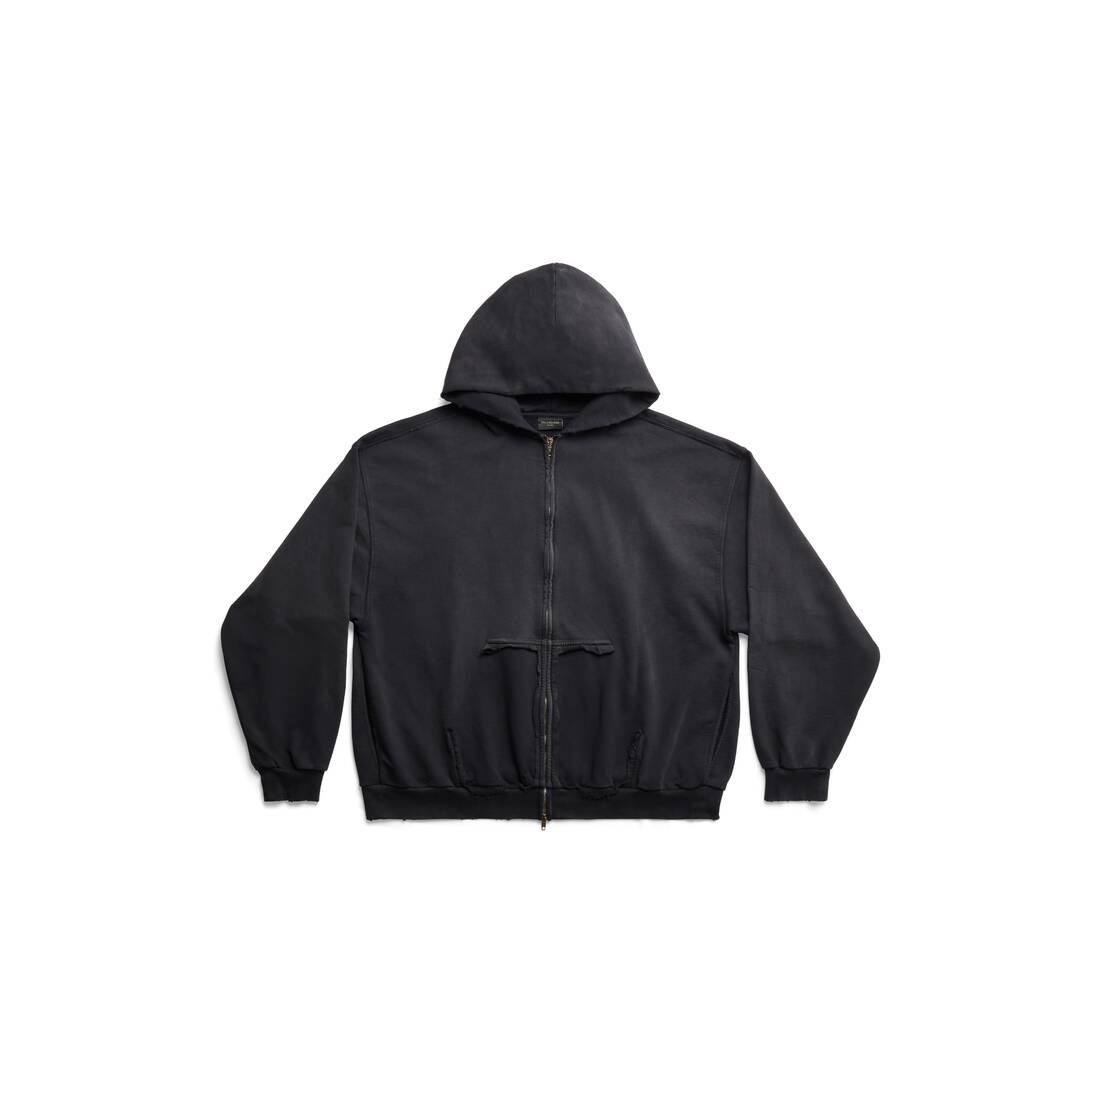 Tape Type Ripped Pocket Zip-up Hoodie Large Fit in Black Faded